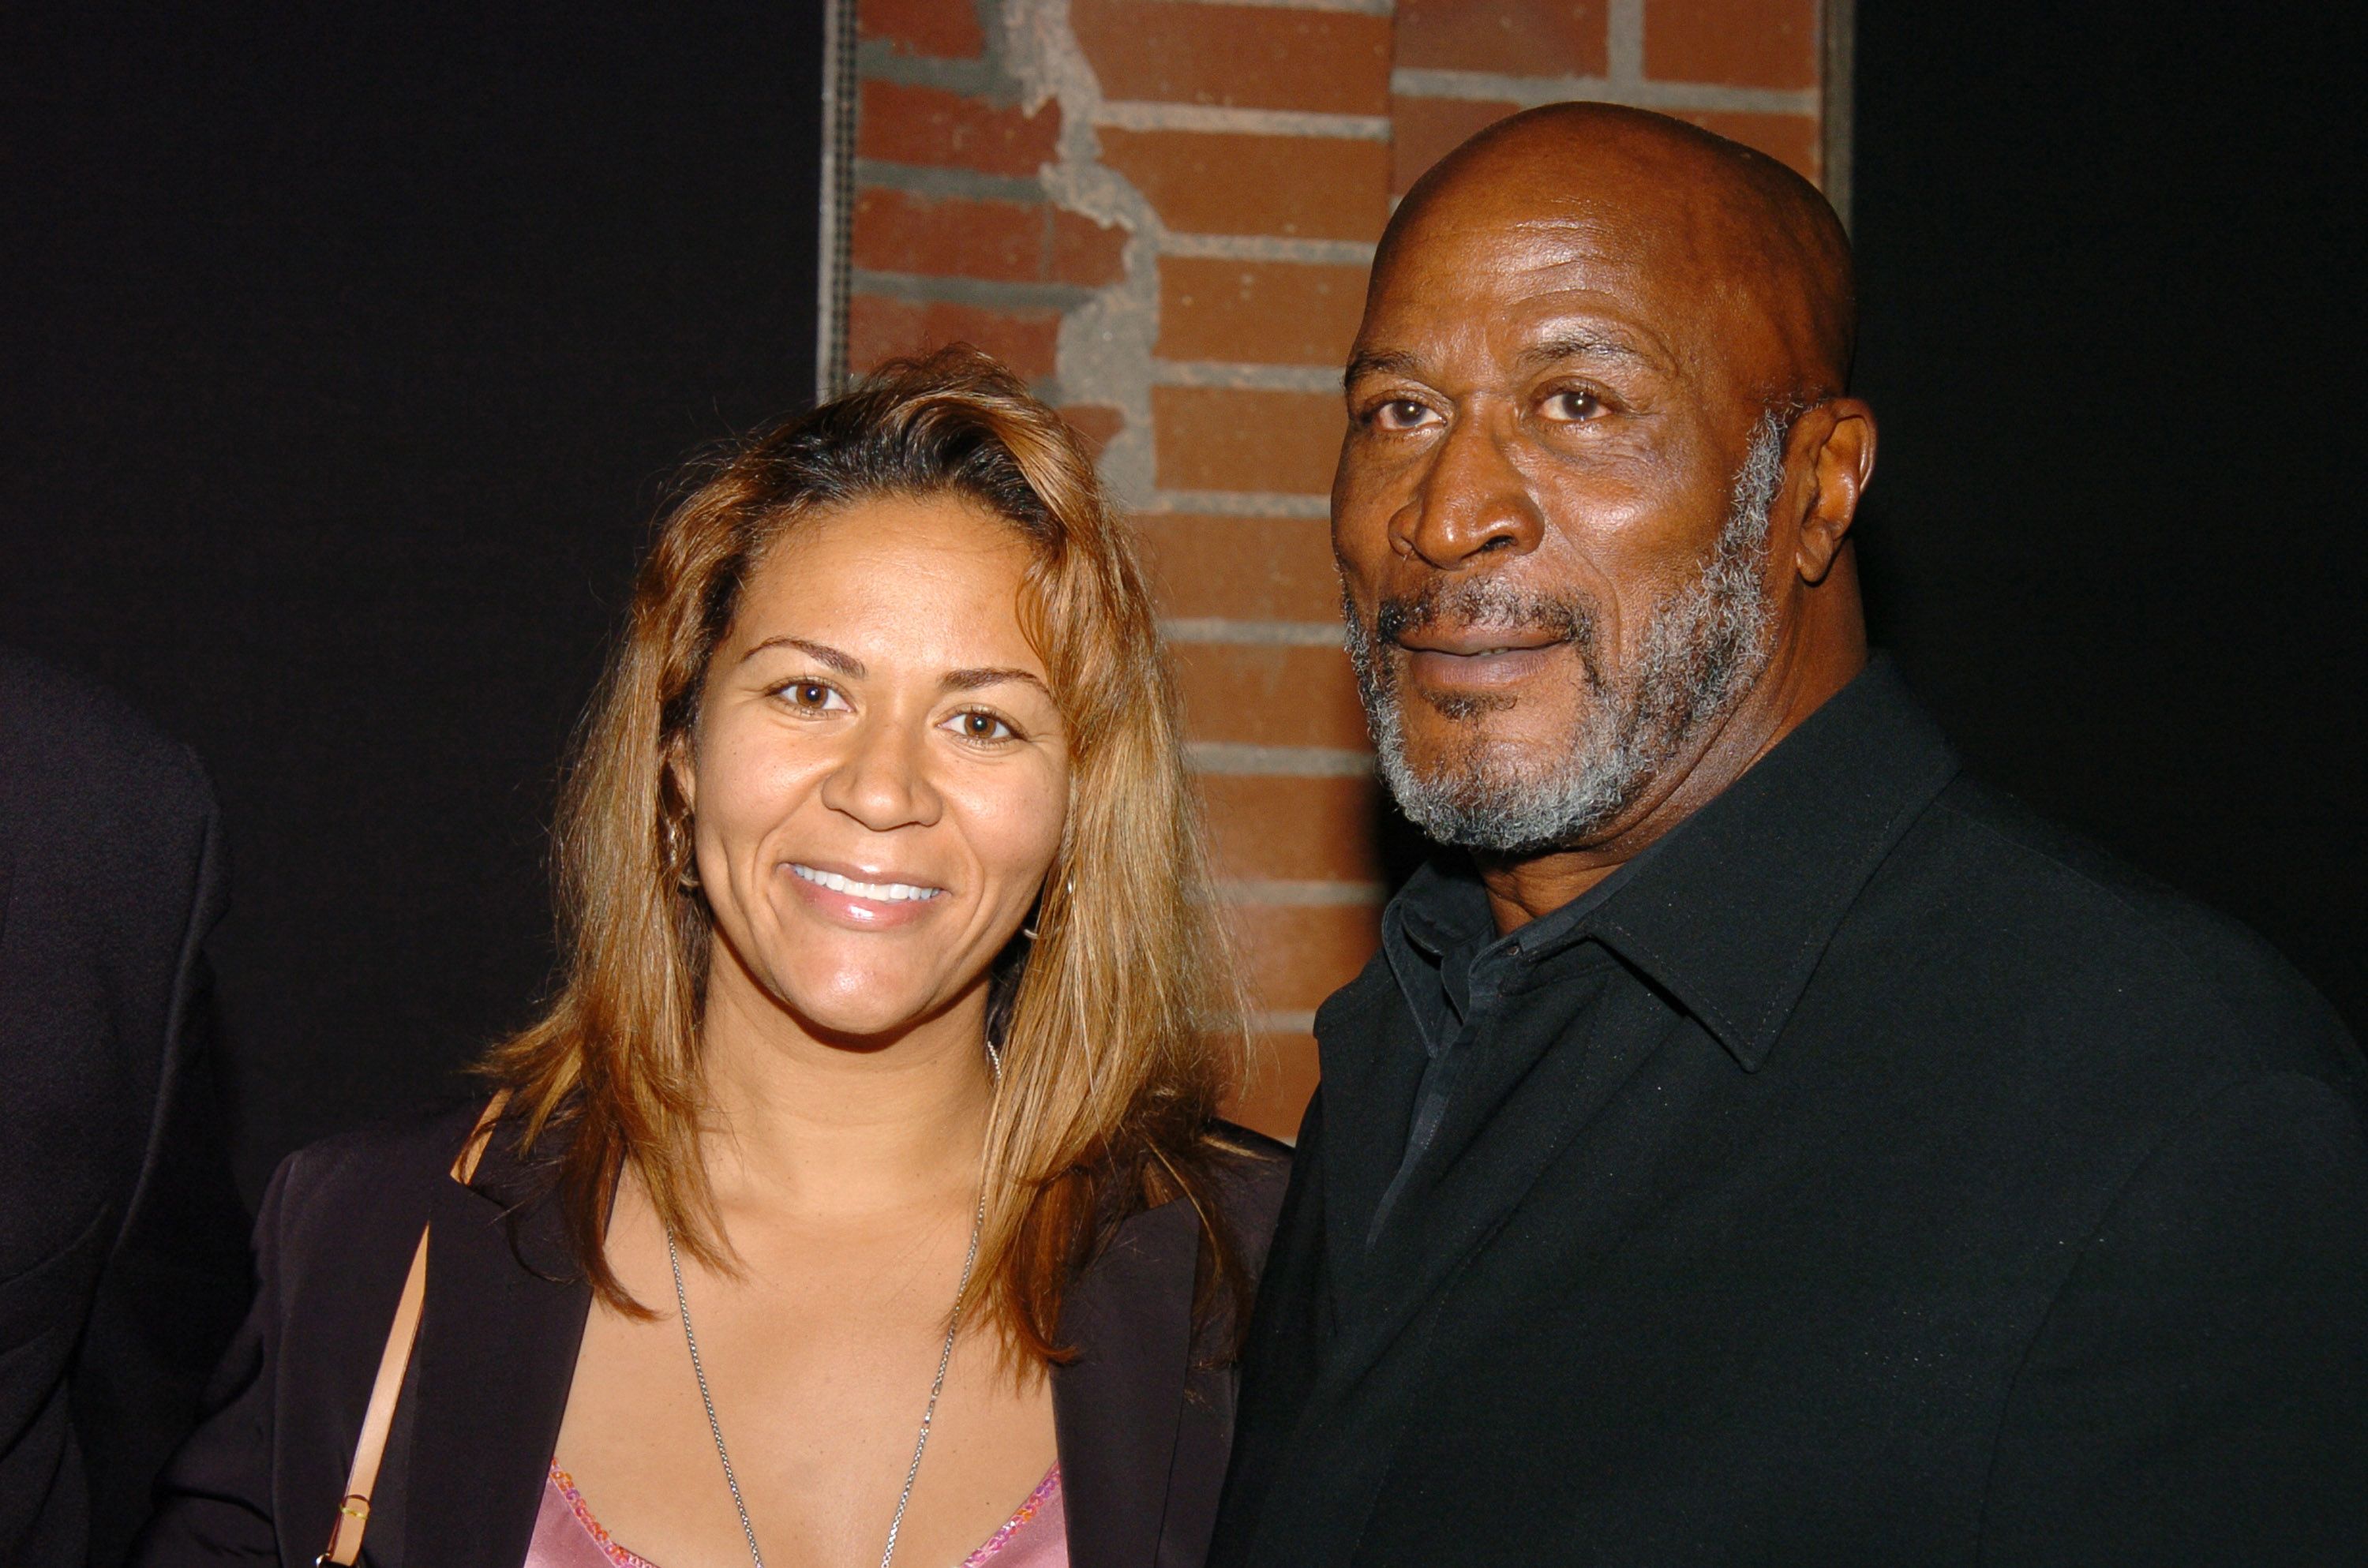 Actor John Amos and daughter Shannon attend the after-party of Cure Autism Now's celebration of the Third Annual "Acts of Love" on November 8, 2004 in Los Angeles, California | Photo: Getty Images